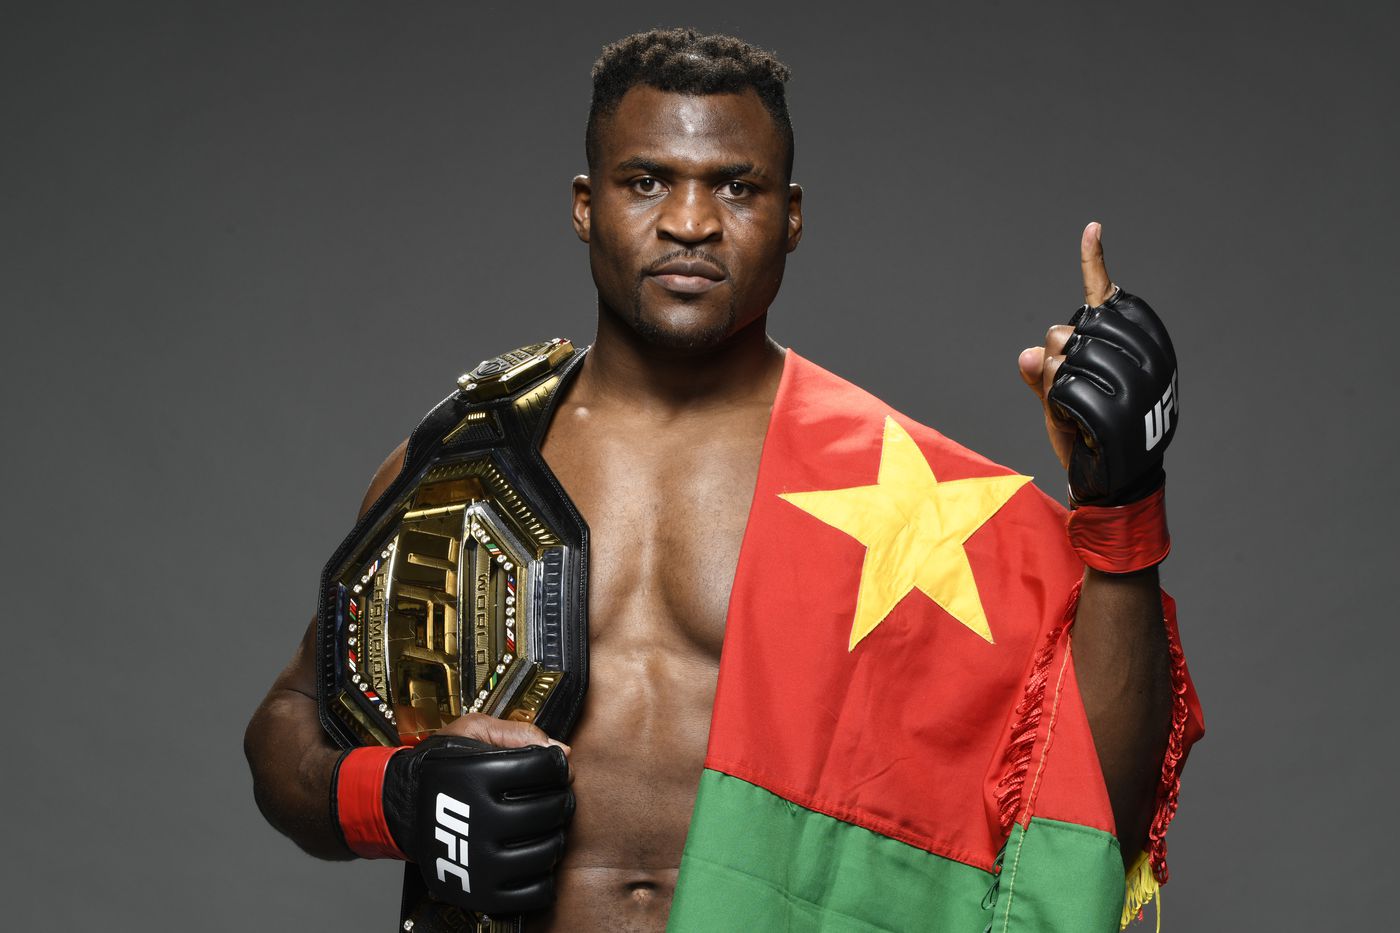 Francis Ngannou slams UFC claiming he lost out on a deal of over a MILLION dollars due to the promotion's exclusive deals